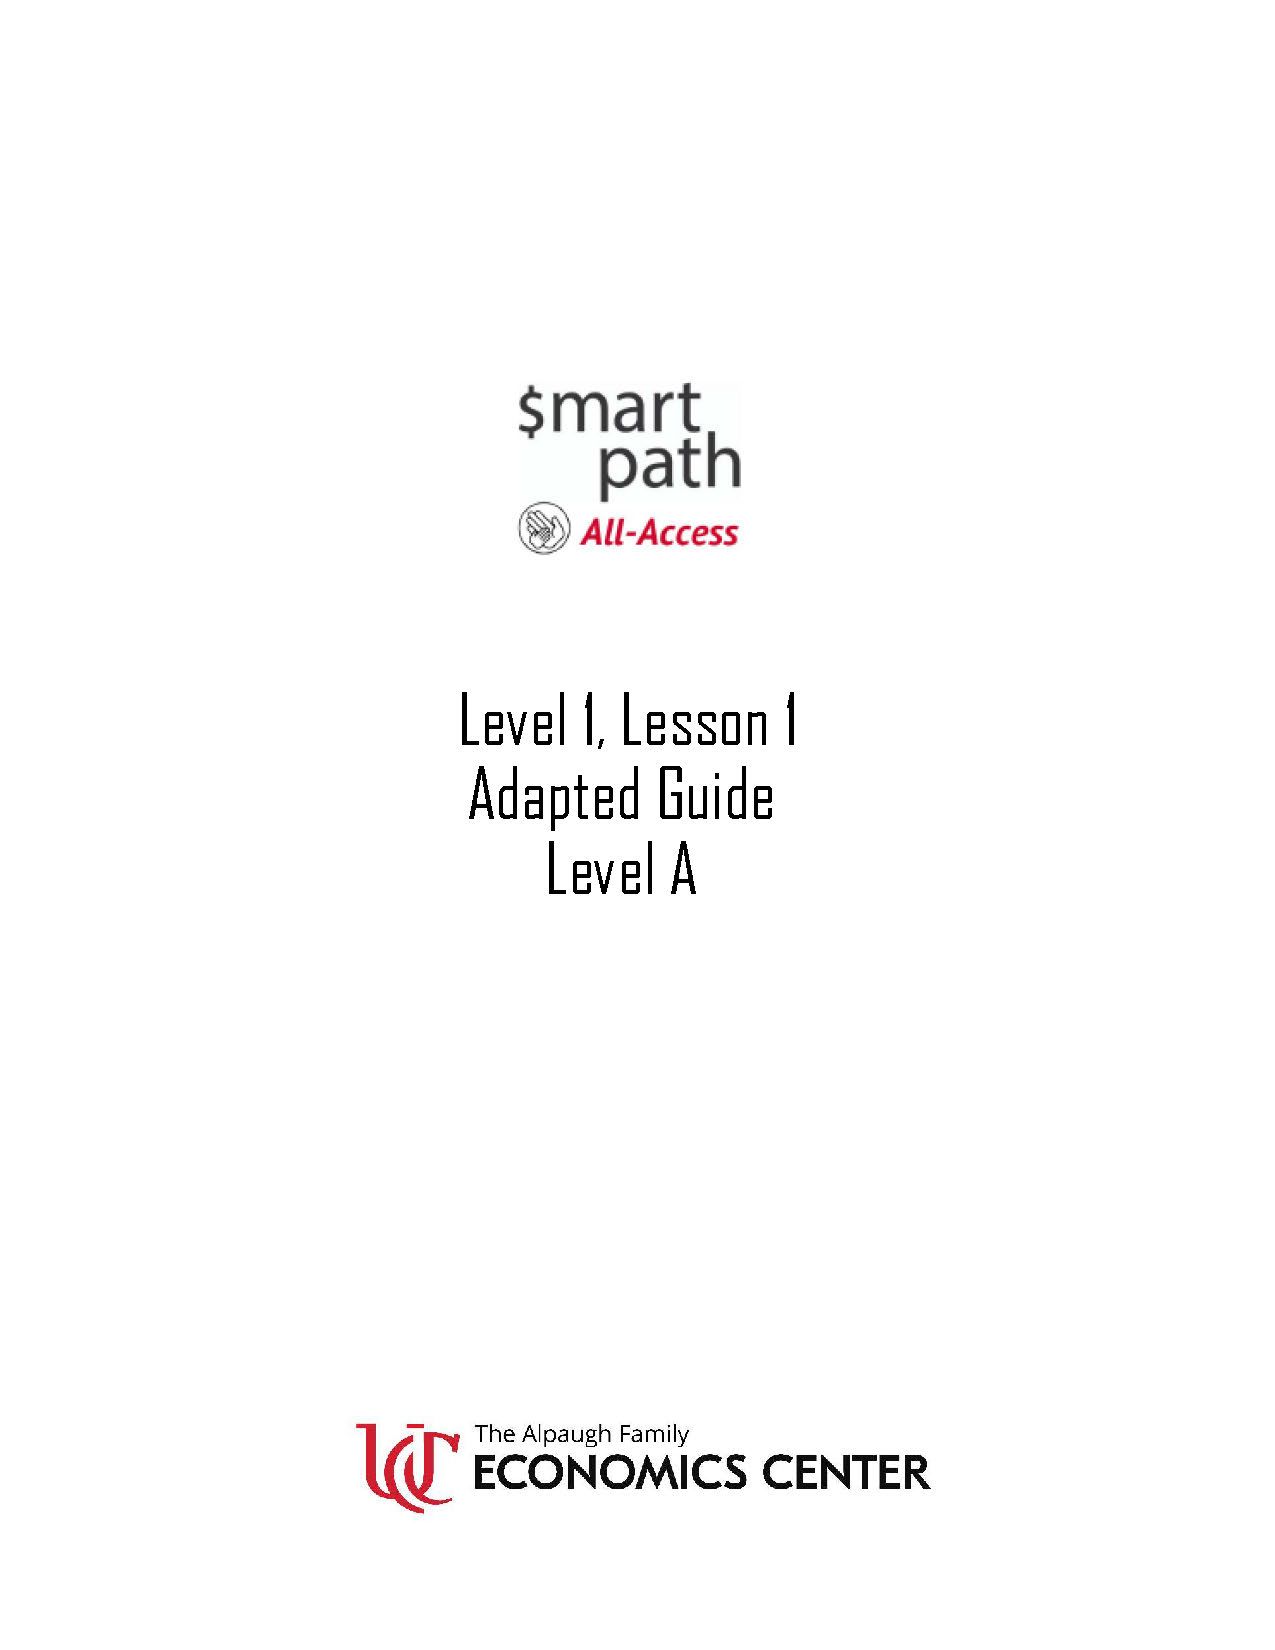 New Level 1 Lesson 1 Cover